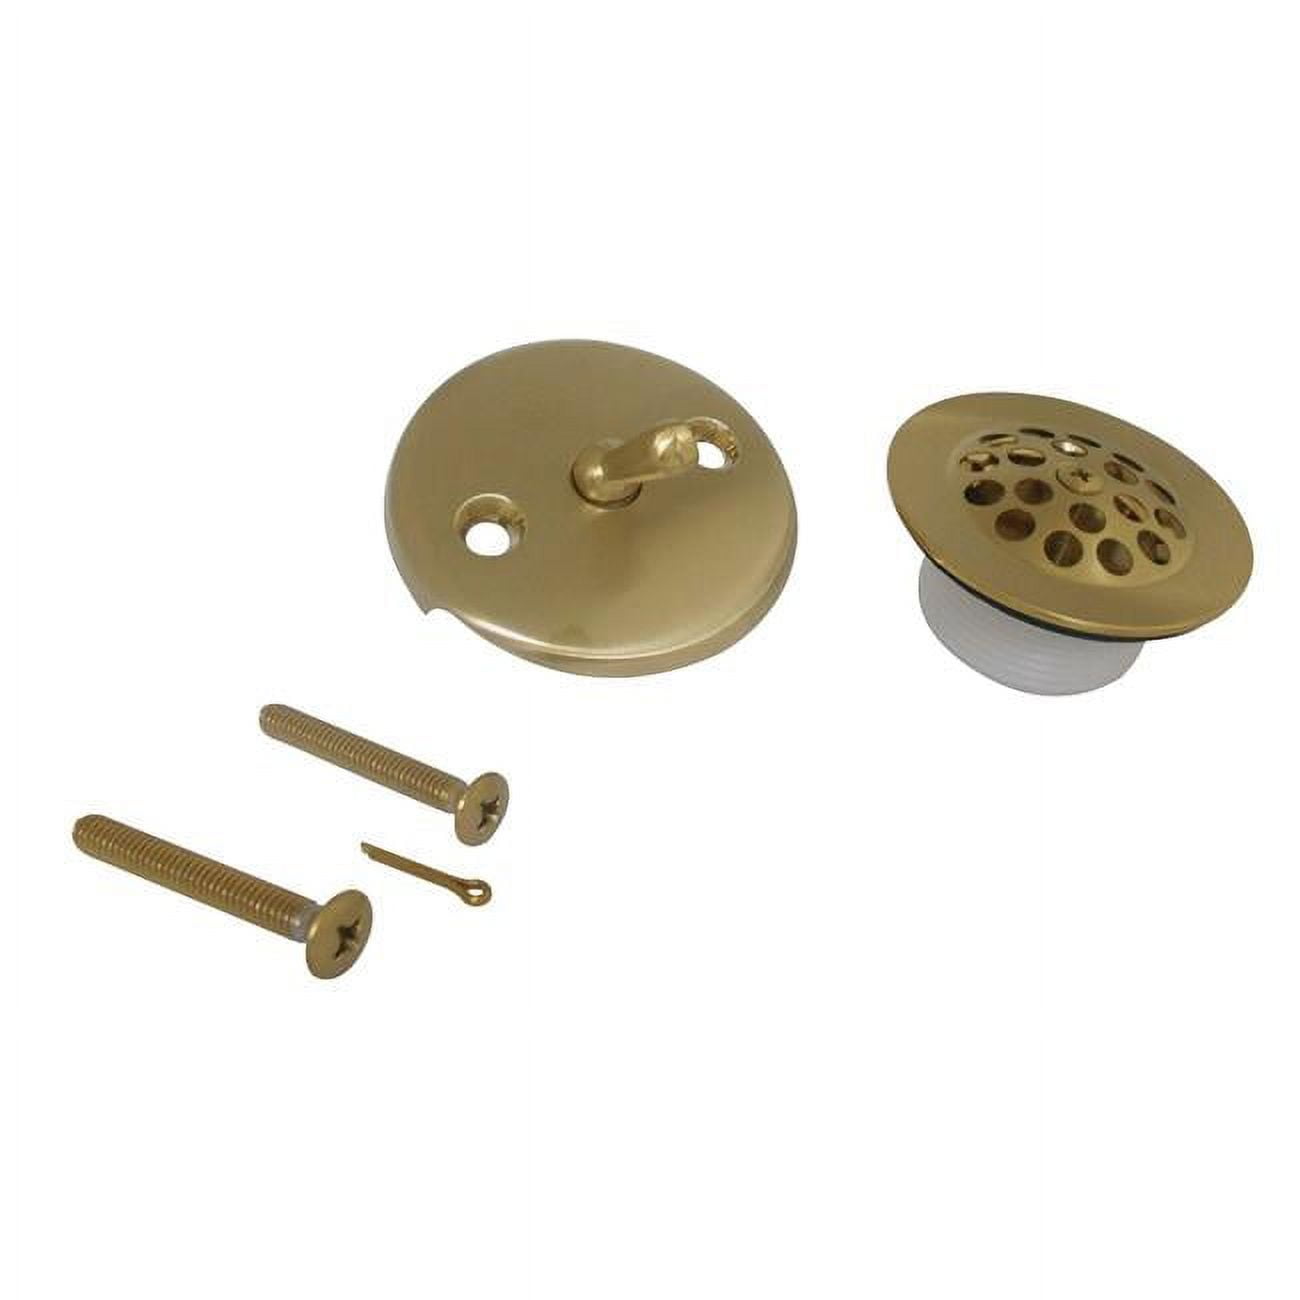 Bath Tub Overflow Drain Cover, Trip Lever Cover, Protects from Accidental Contact of Lever, Overflow Plate Cover, Use Lever While Installed, Durable